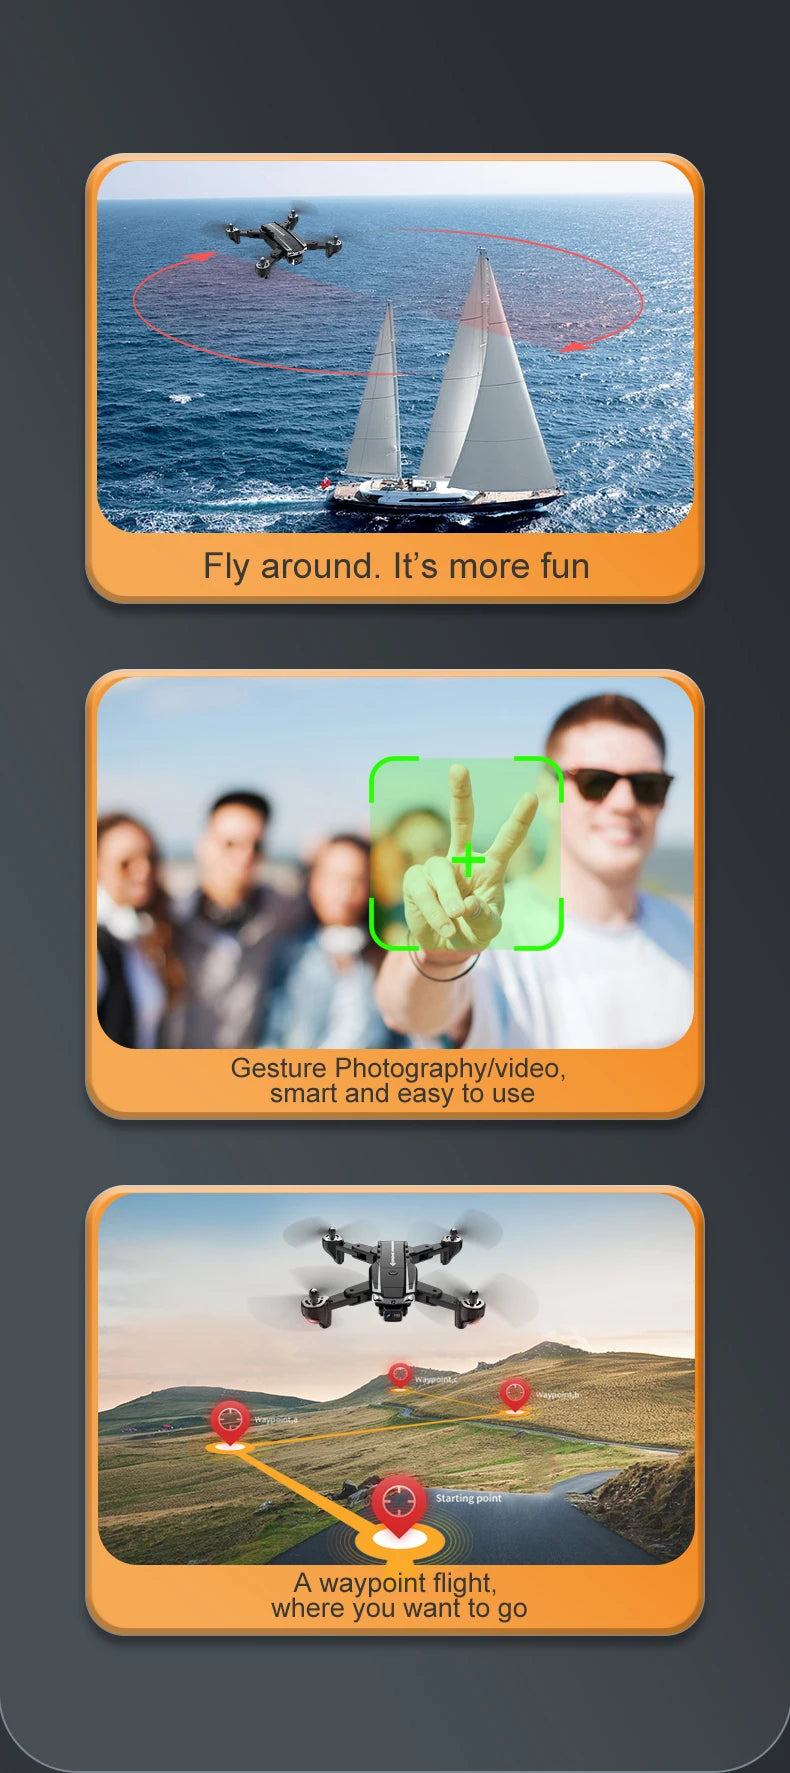 A5S Drone, it's more fun gesture photographylvideo, smart and easy 